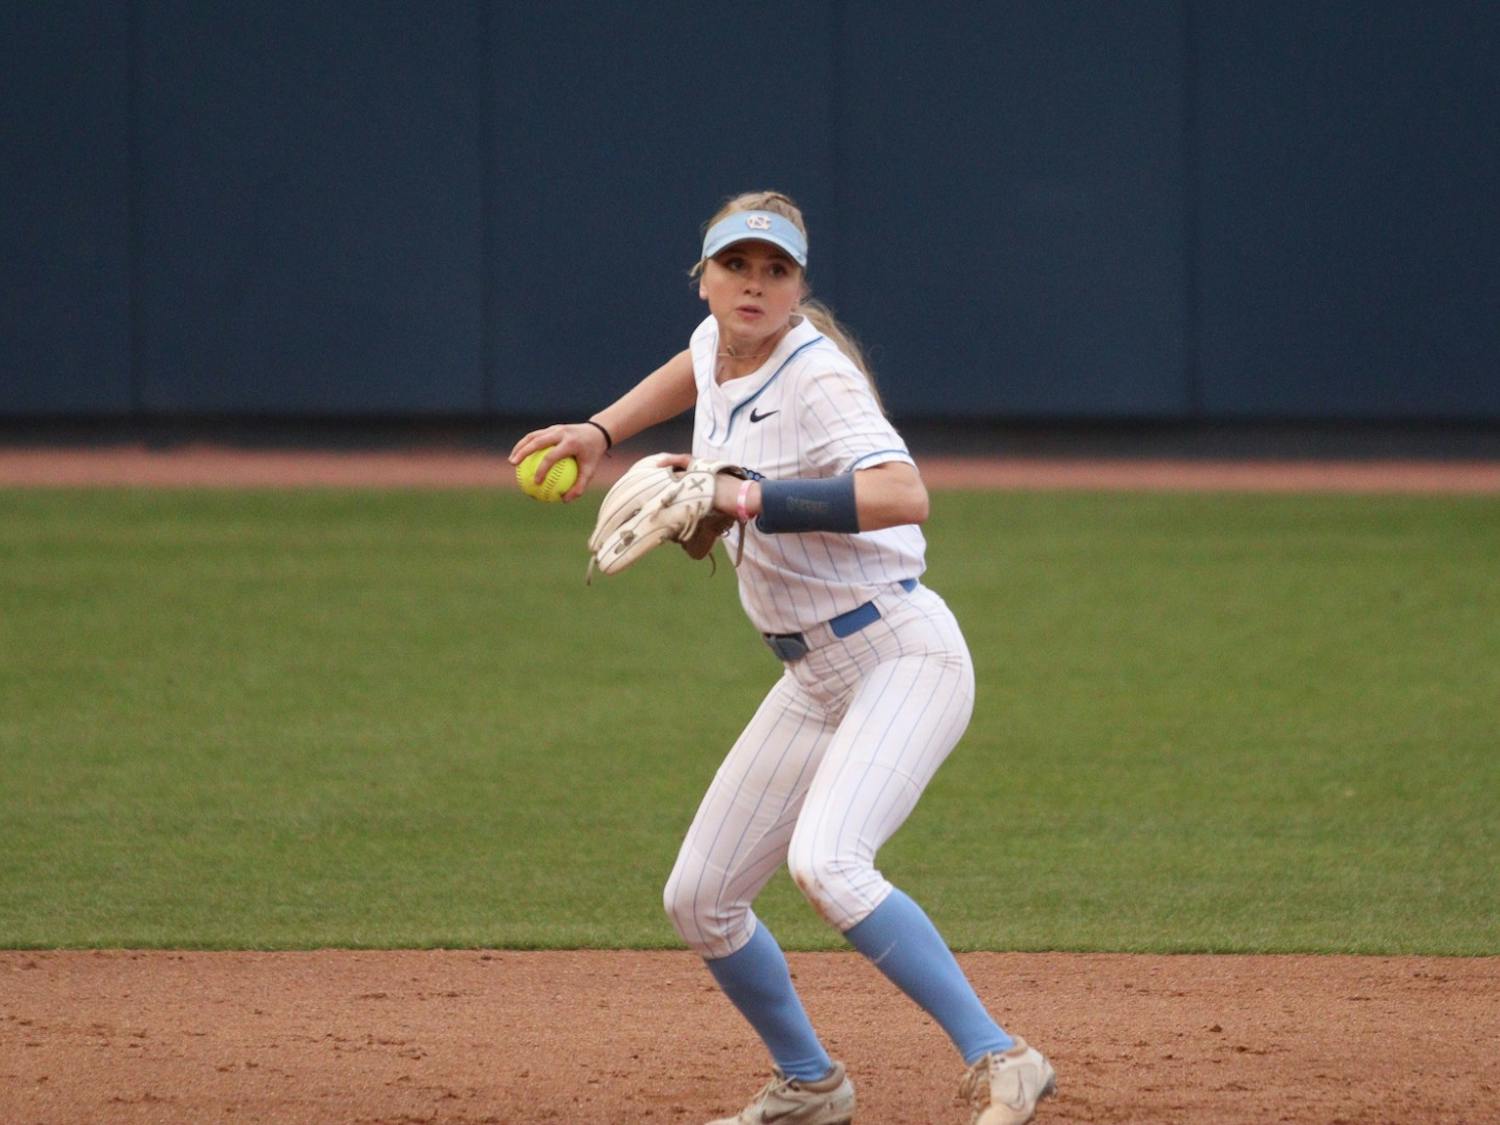 Utility player Alex Brown (5) prepares to throw to first base during a home game against UNCW. The Heels won 2-0 on Tuesday, March 15, 2022.